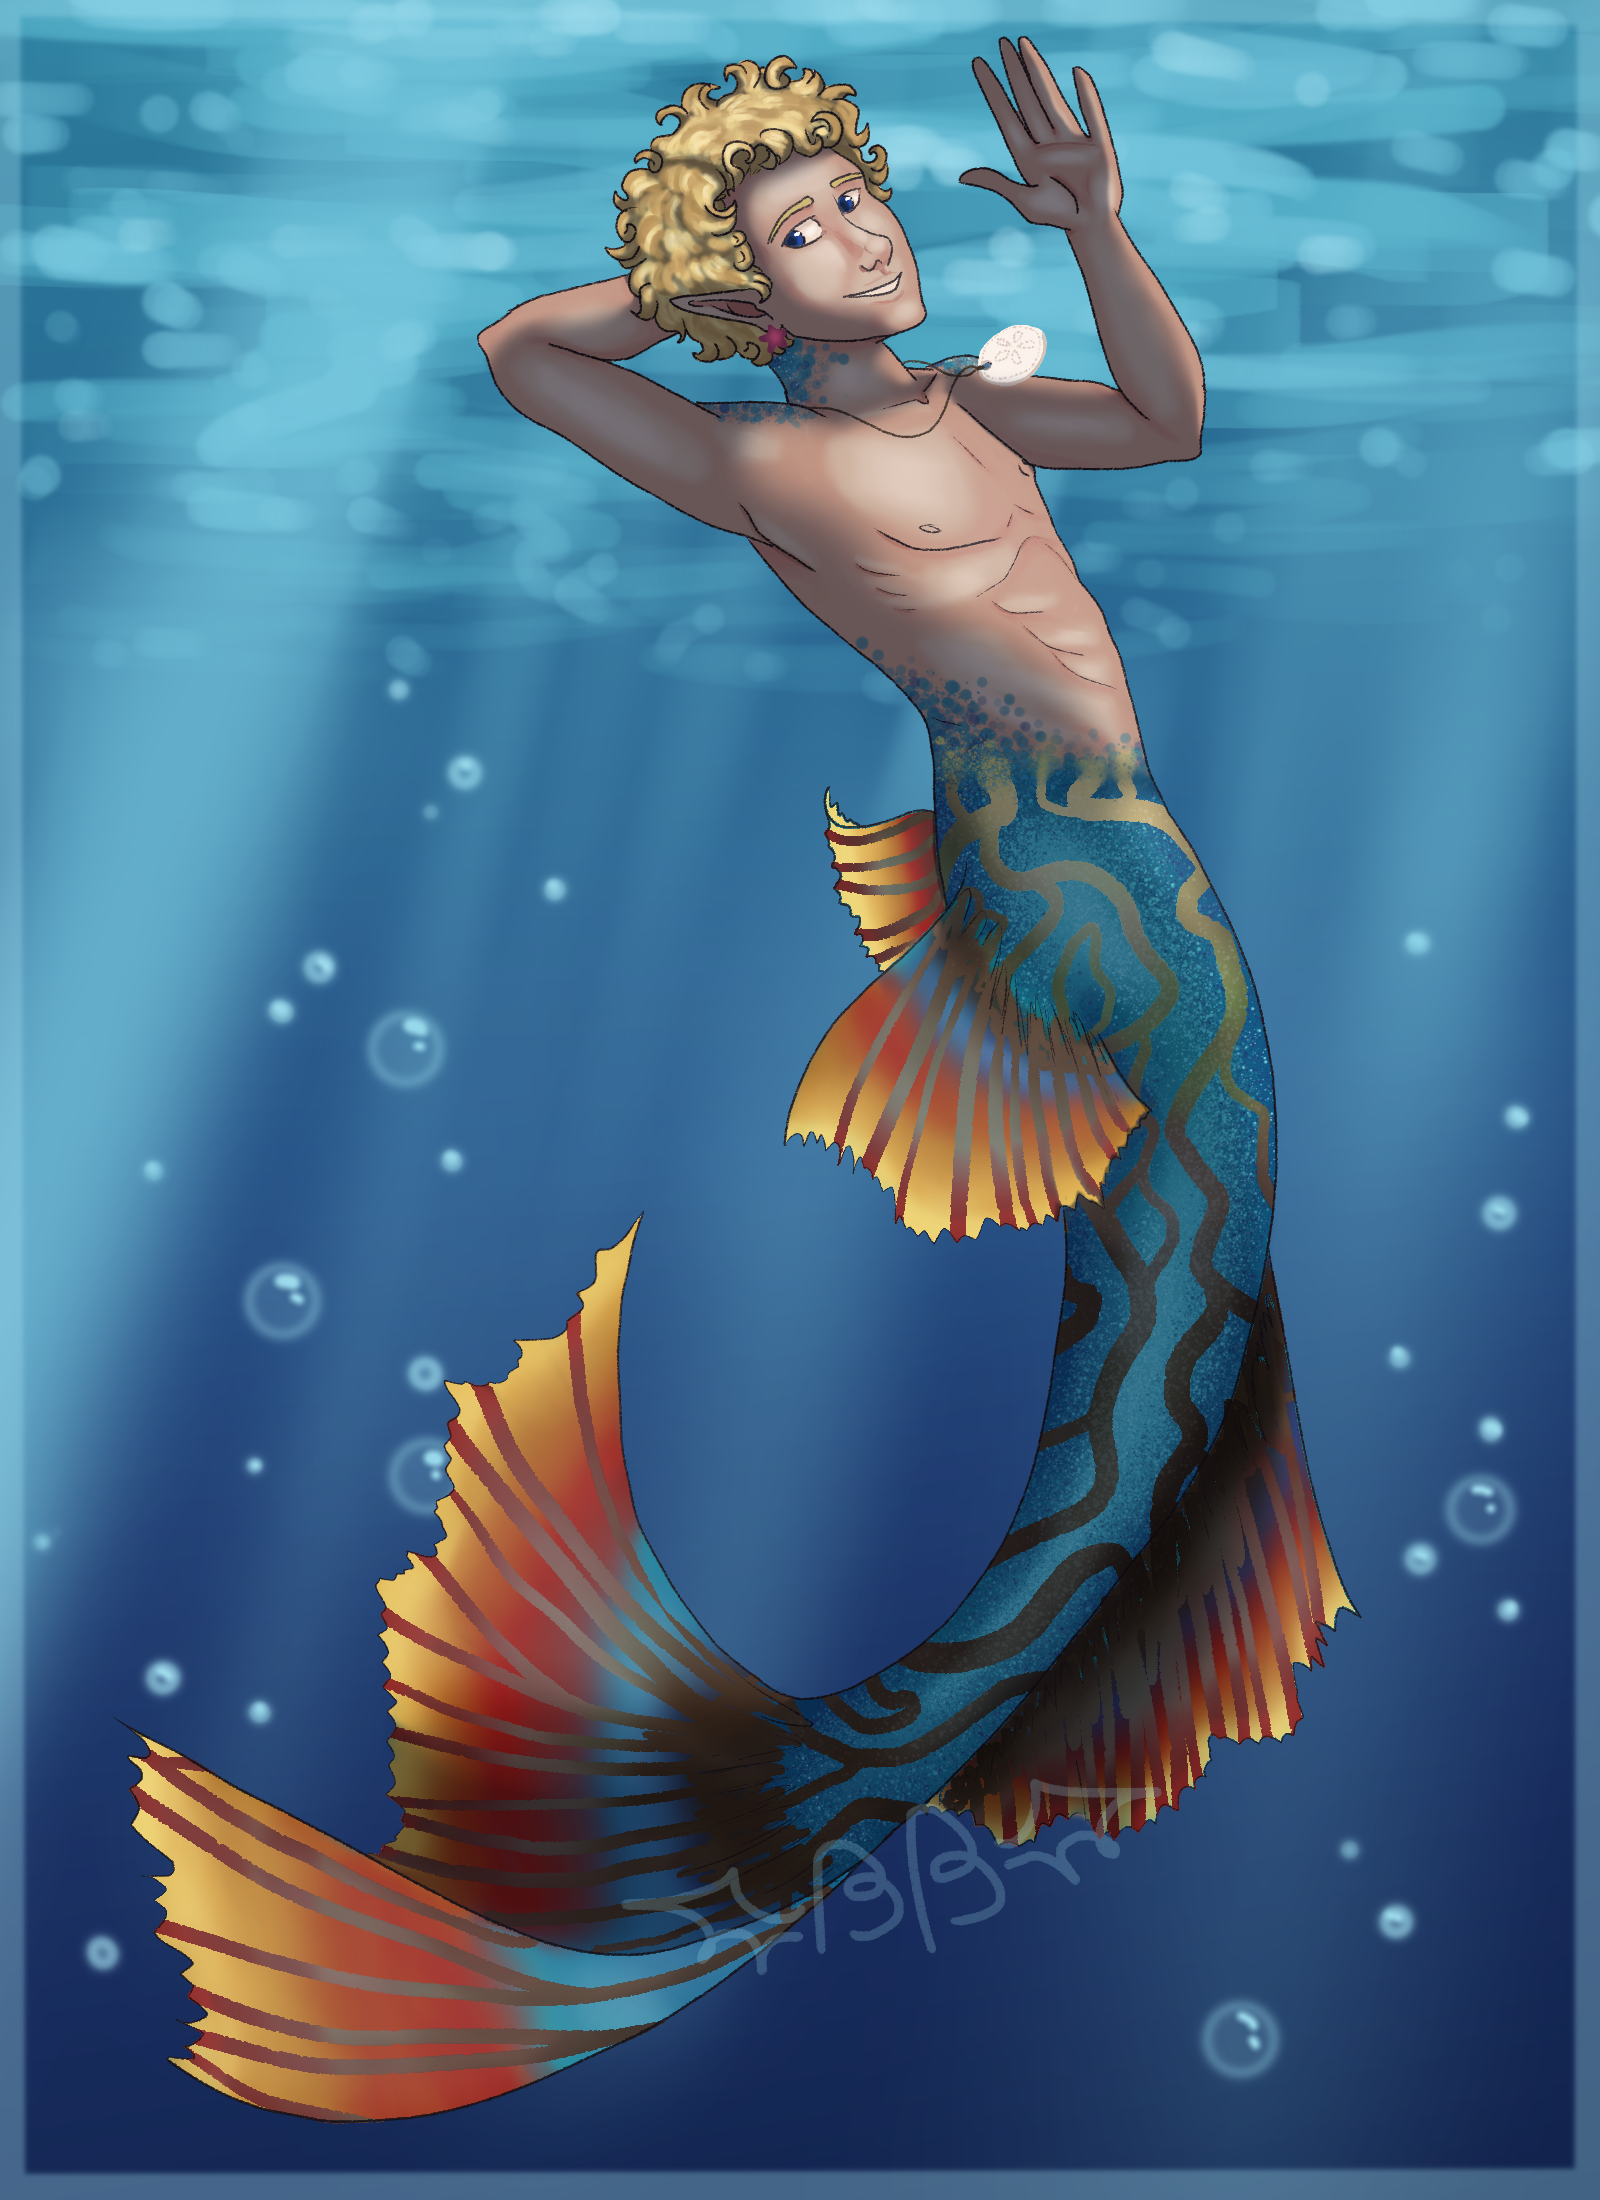 A piece of my OC, Leon as a very colorful mermaid underwater